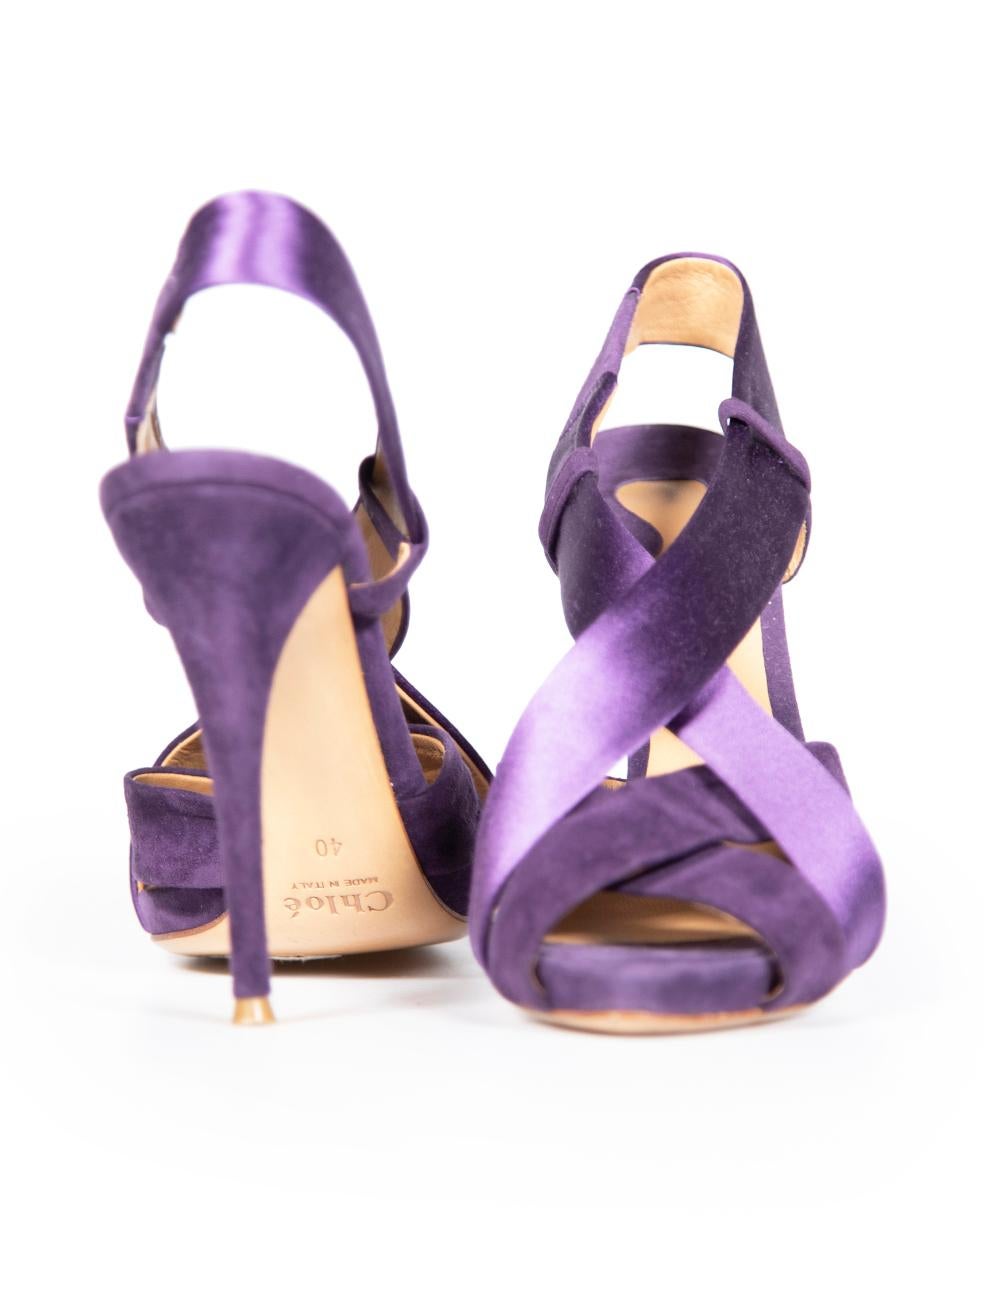 Chloé Purple Satin Cross Strap Heels Size IT 40 In Good Condition For Sale In London, GB